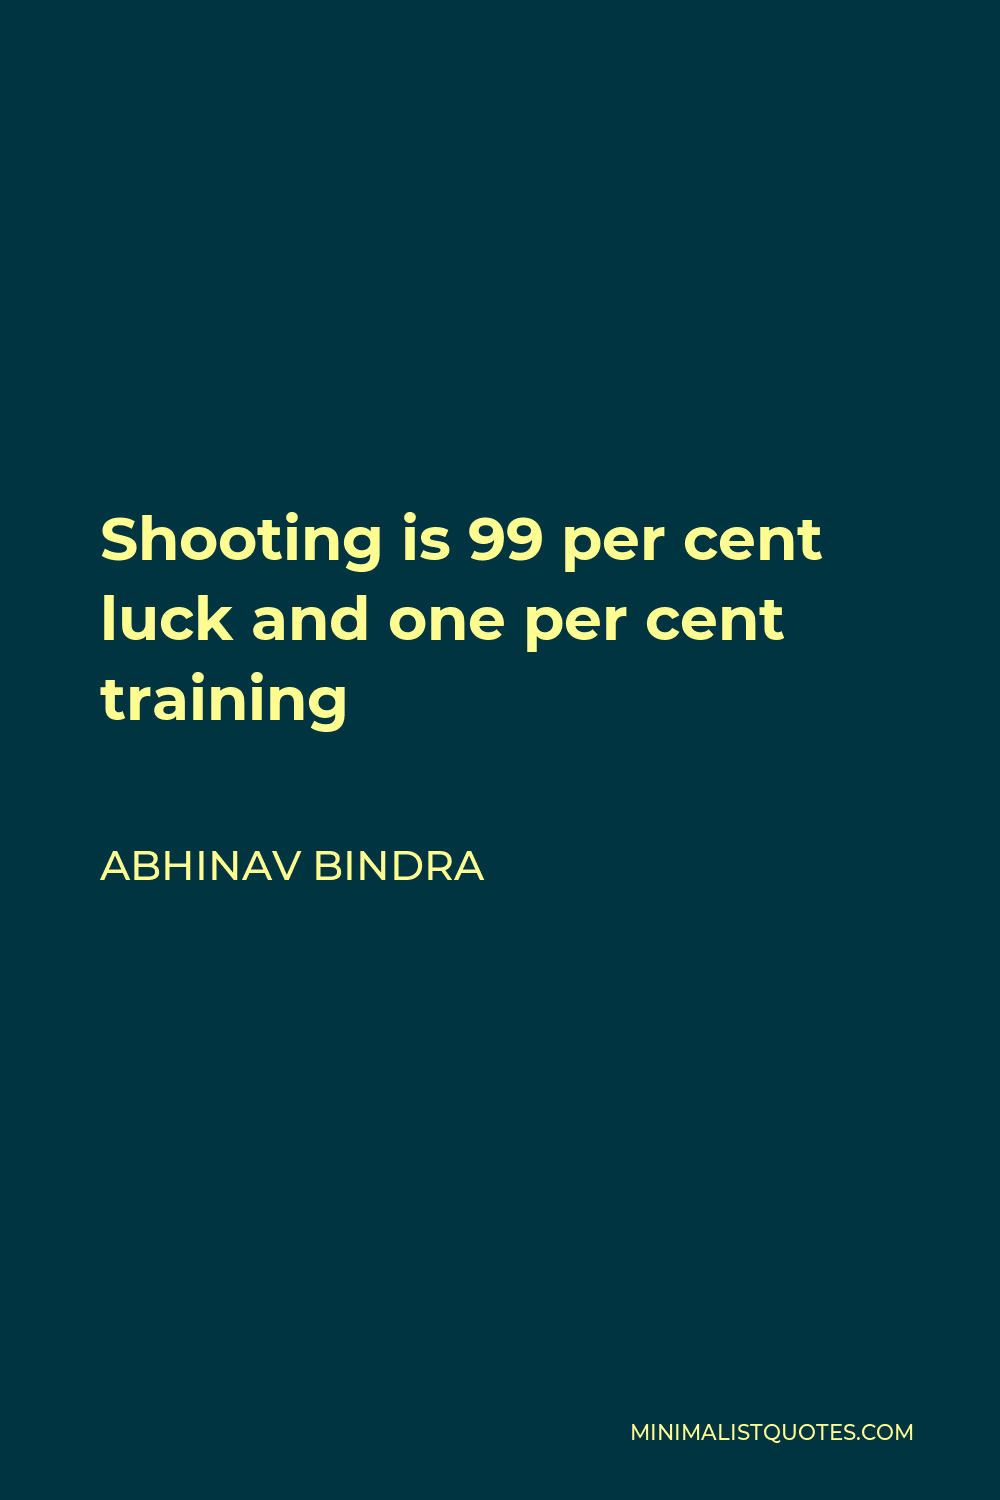 Abhinav Bindra Quote - Shooting is 99 per cent luck and one per cent training